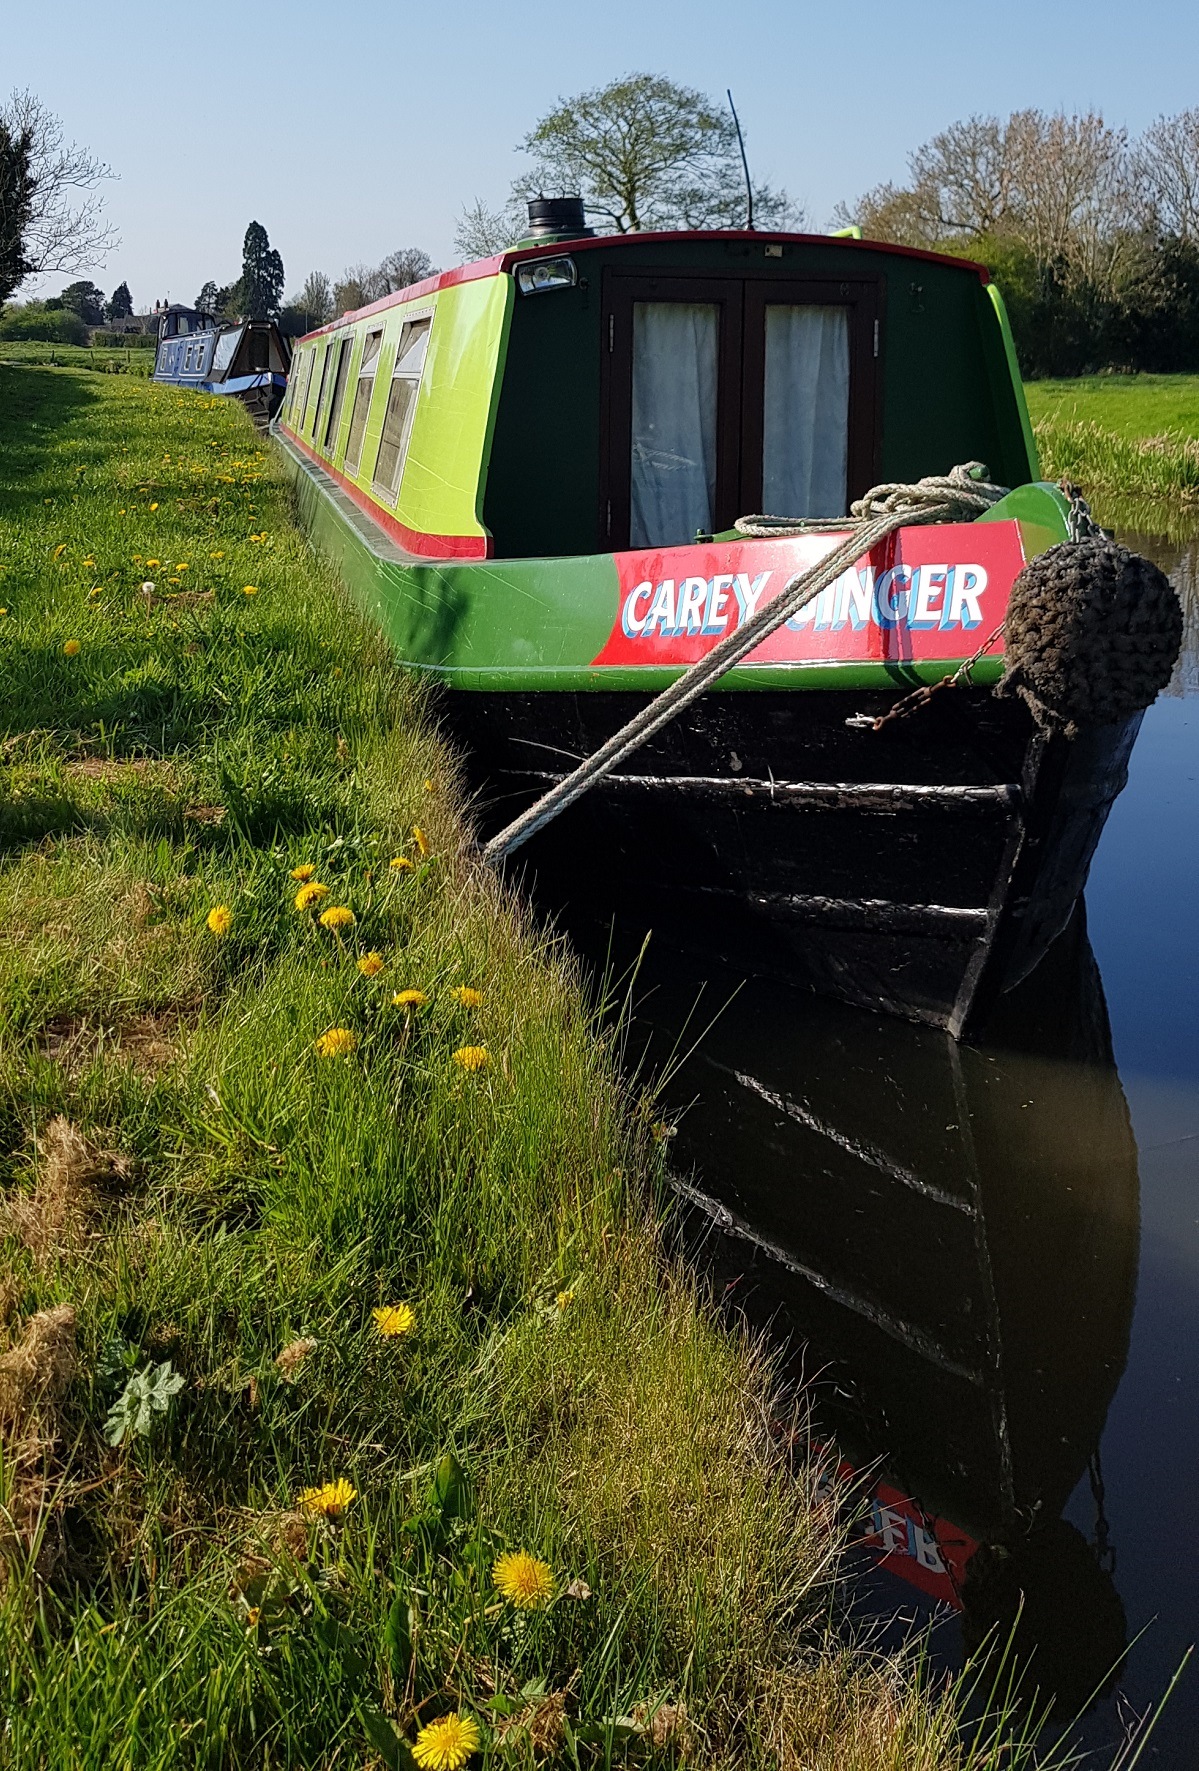 The canal boating adventure through the UK begins